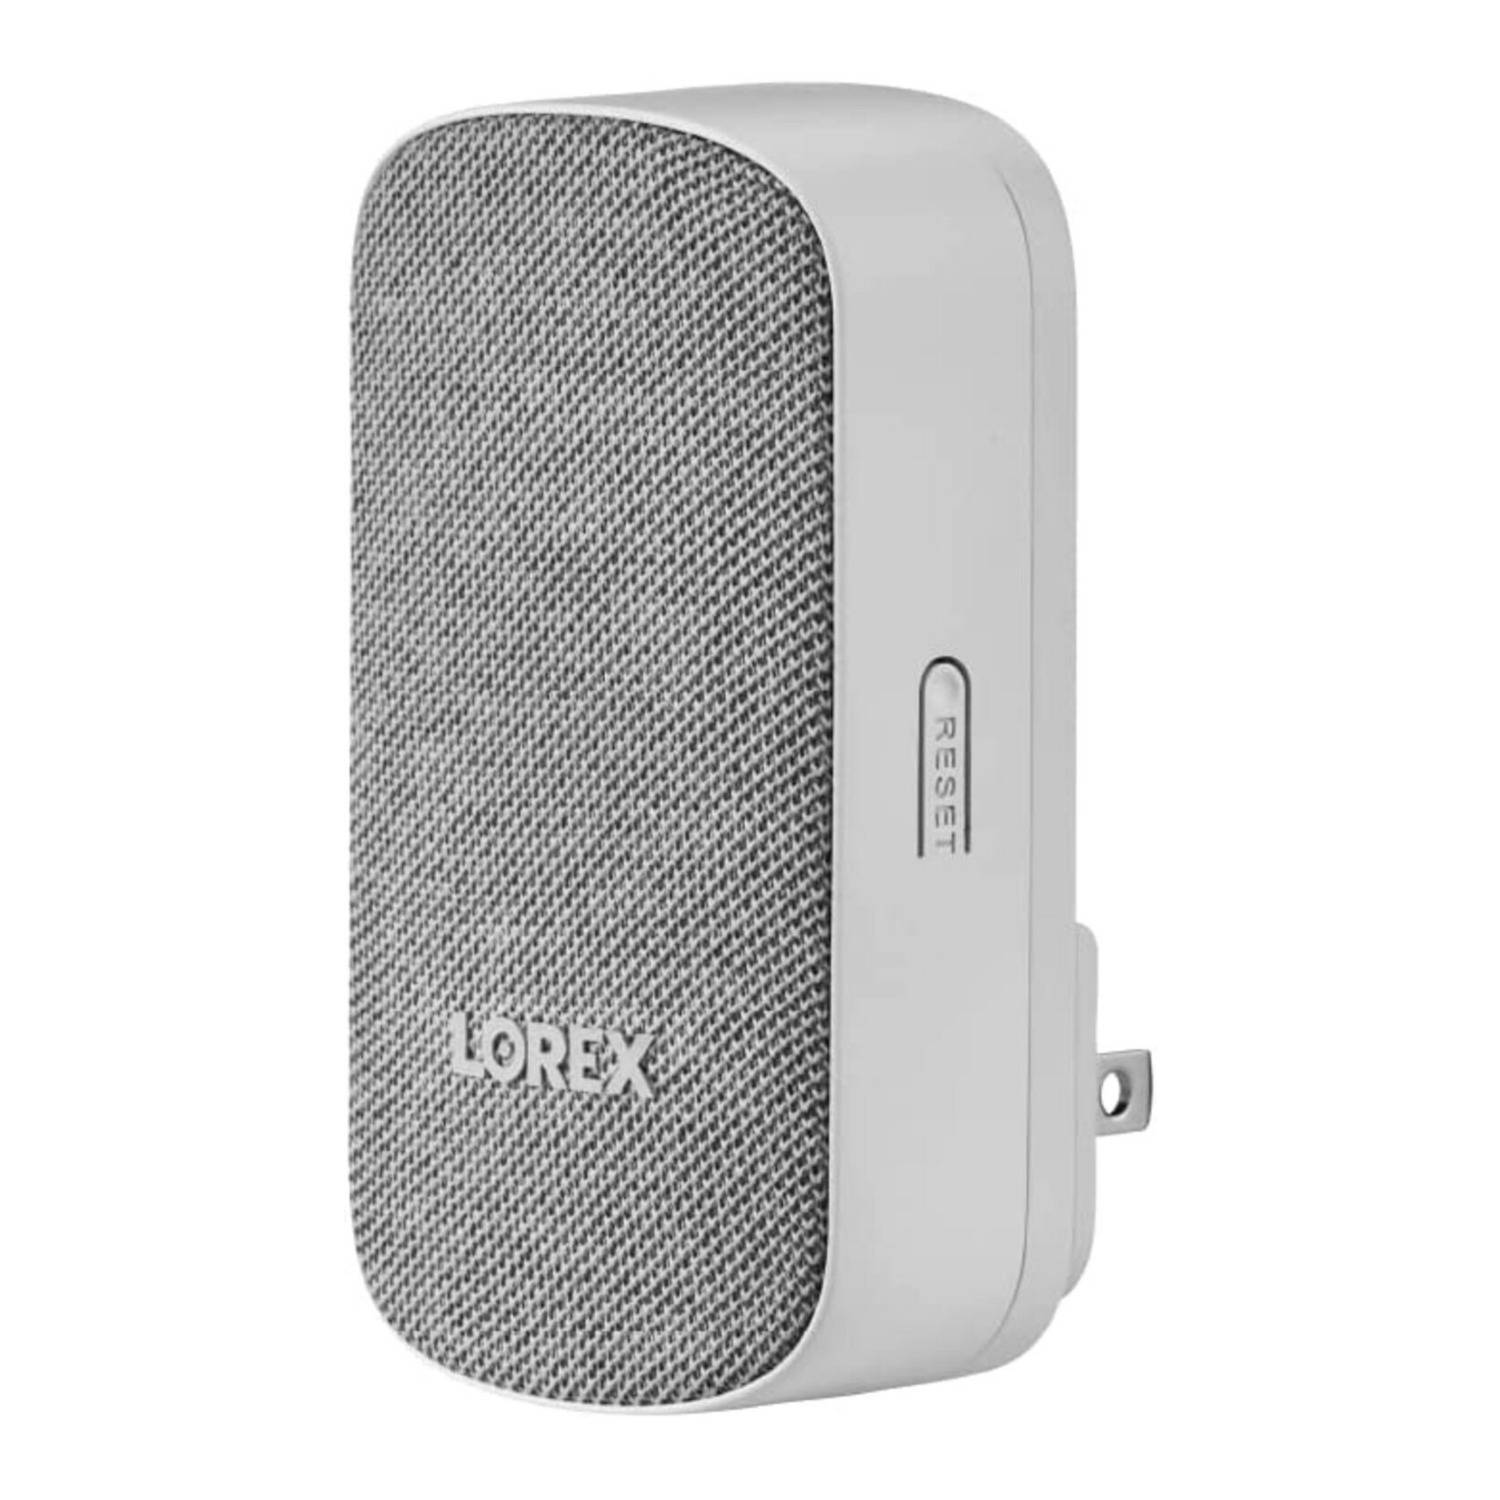 Lorex Wi-Fi Chime for 1080p and 2K Video Doorbells with Customizable Chimes